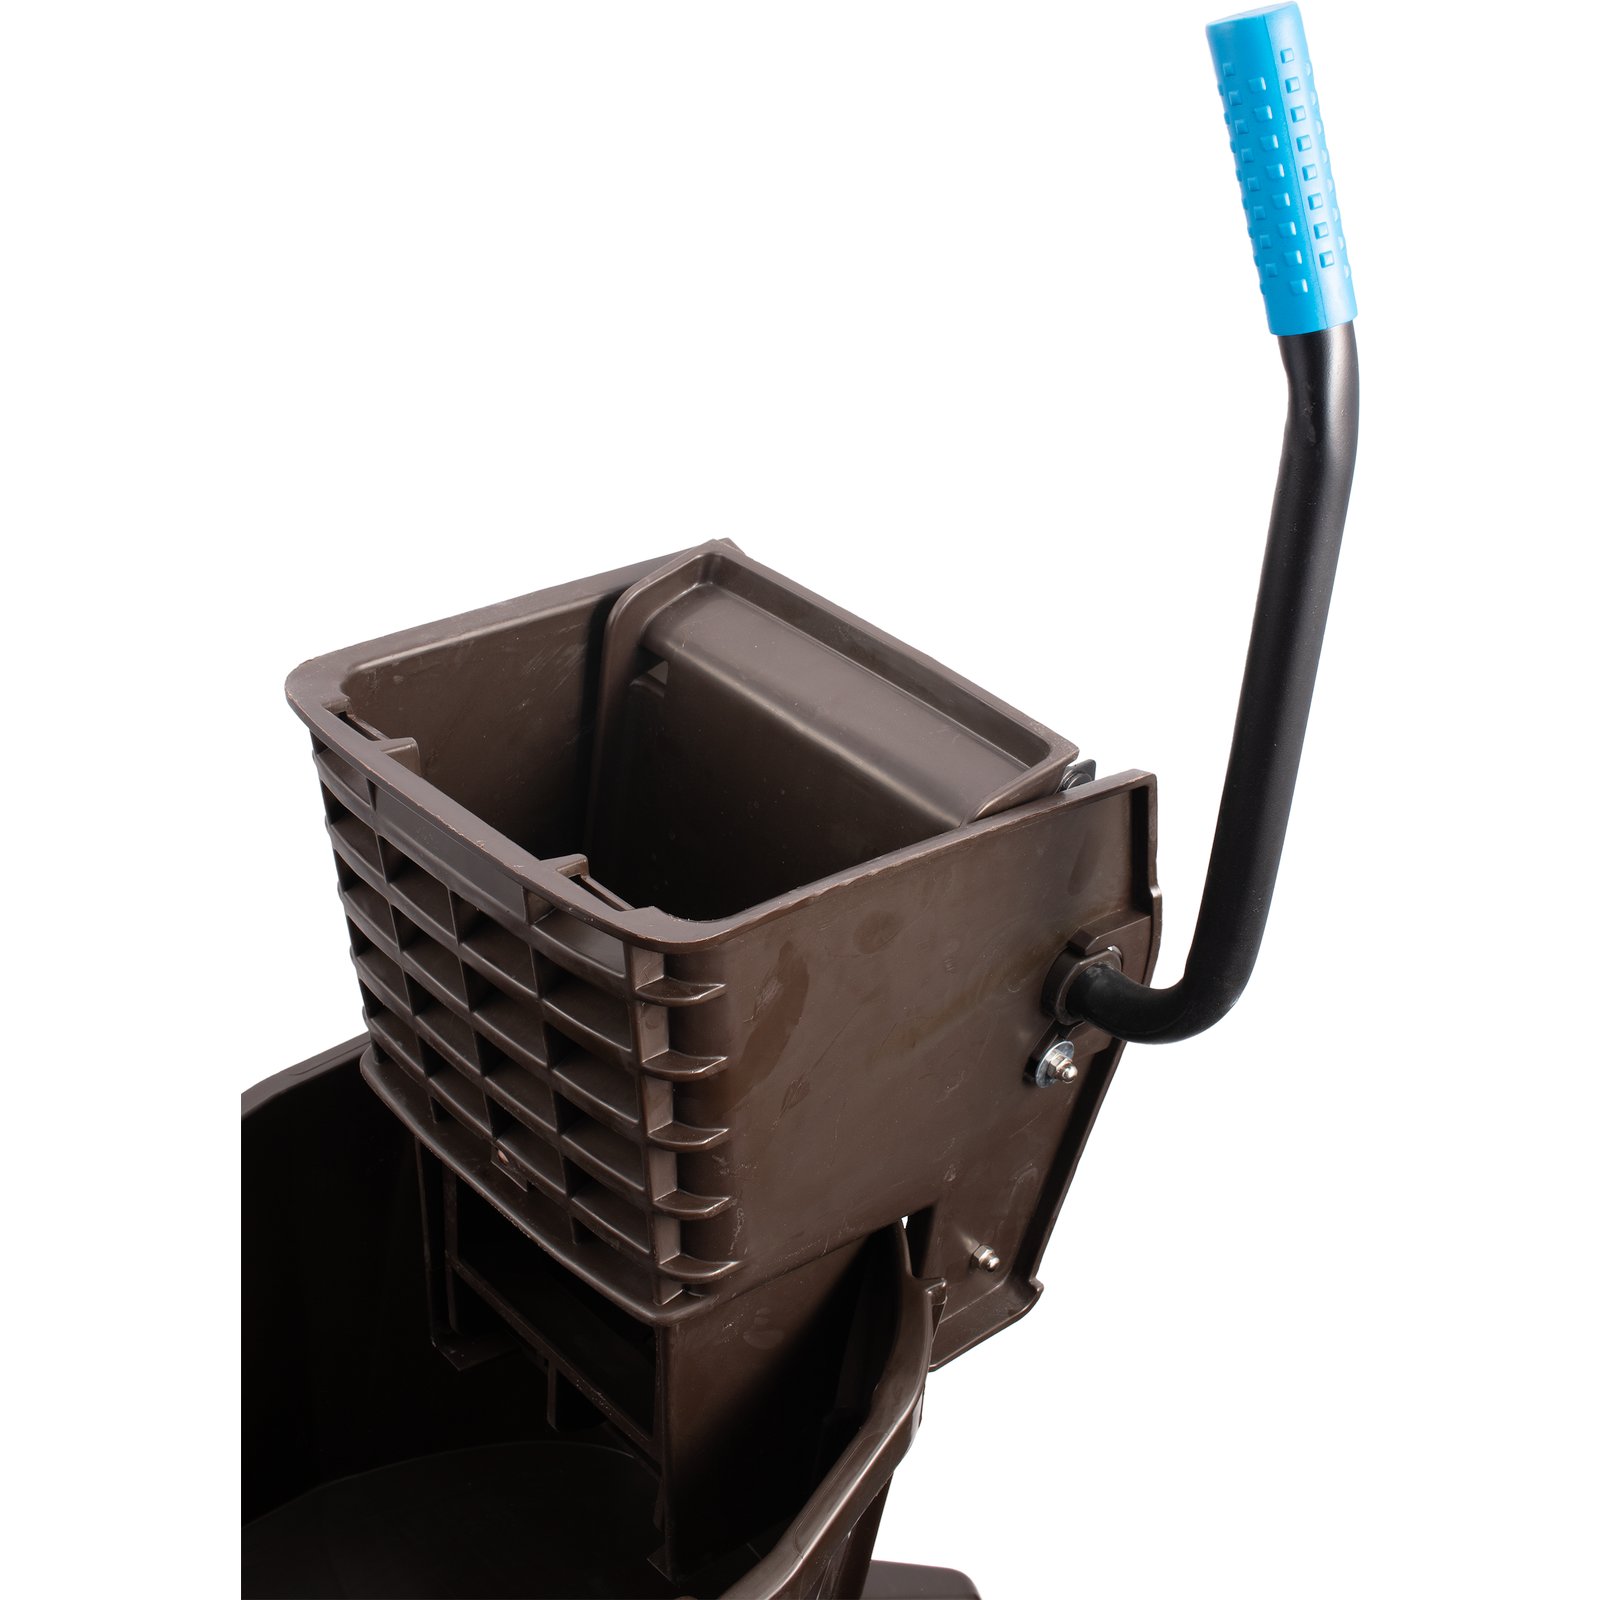 Member's Mark Commercial Mop Bucket with Wringer (36 qt.) - Sam's Club